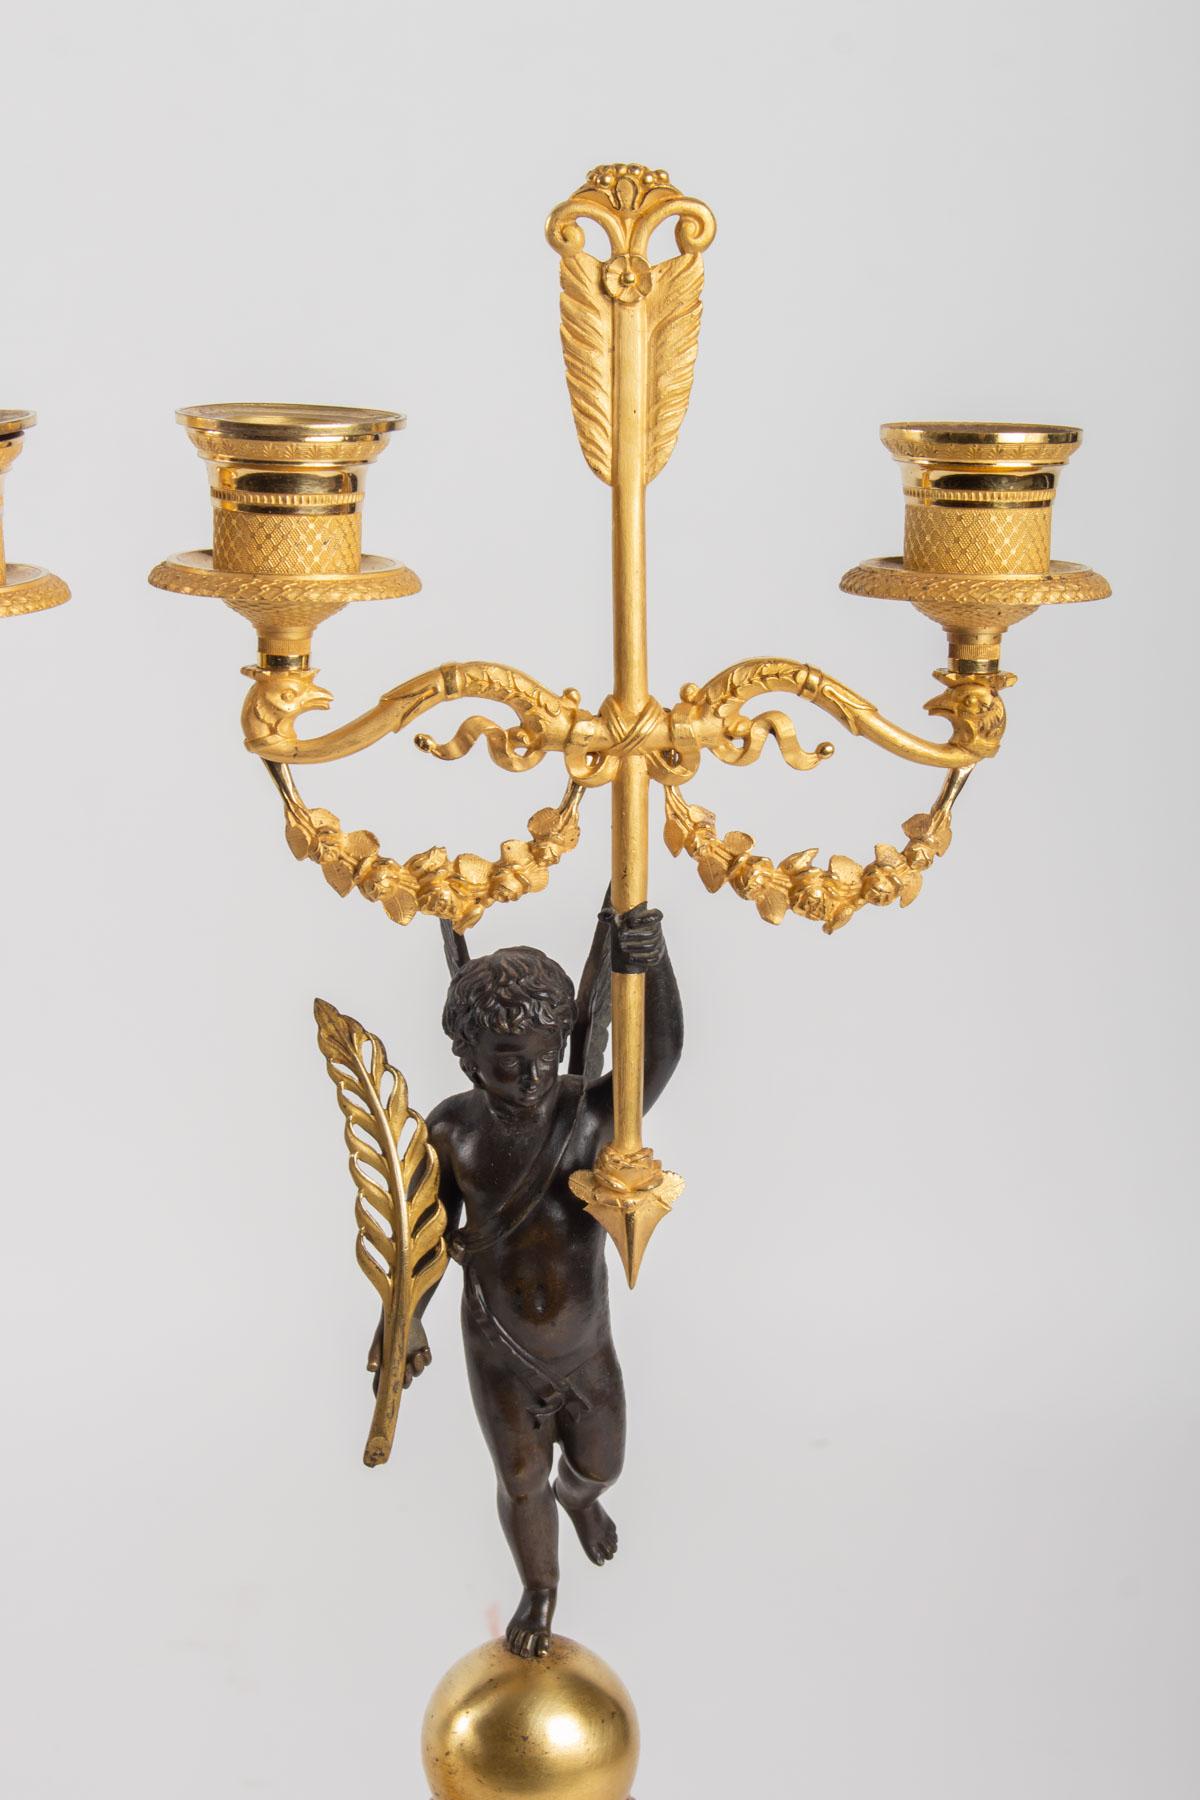 French Pair of Candelabra in Gilt Bronze and Patinated, 19th Century